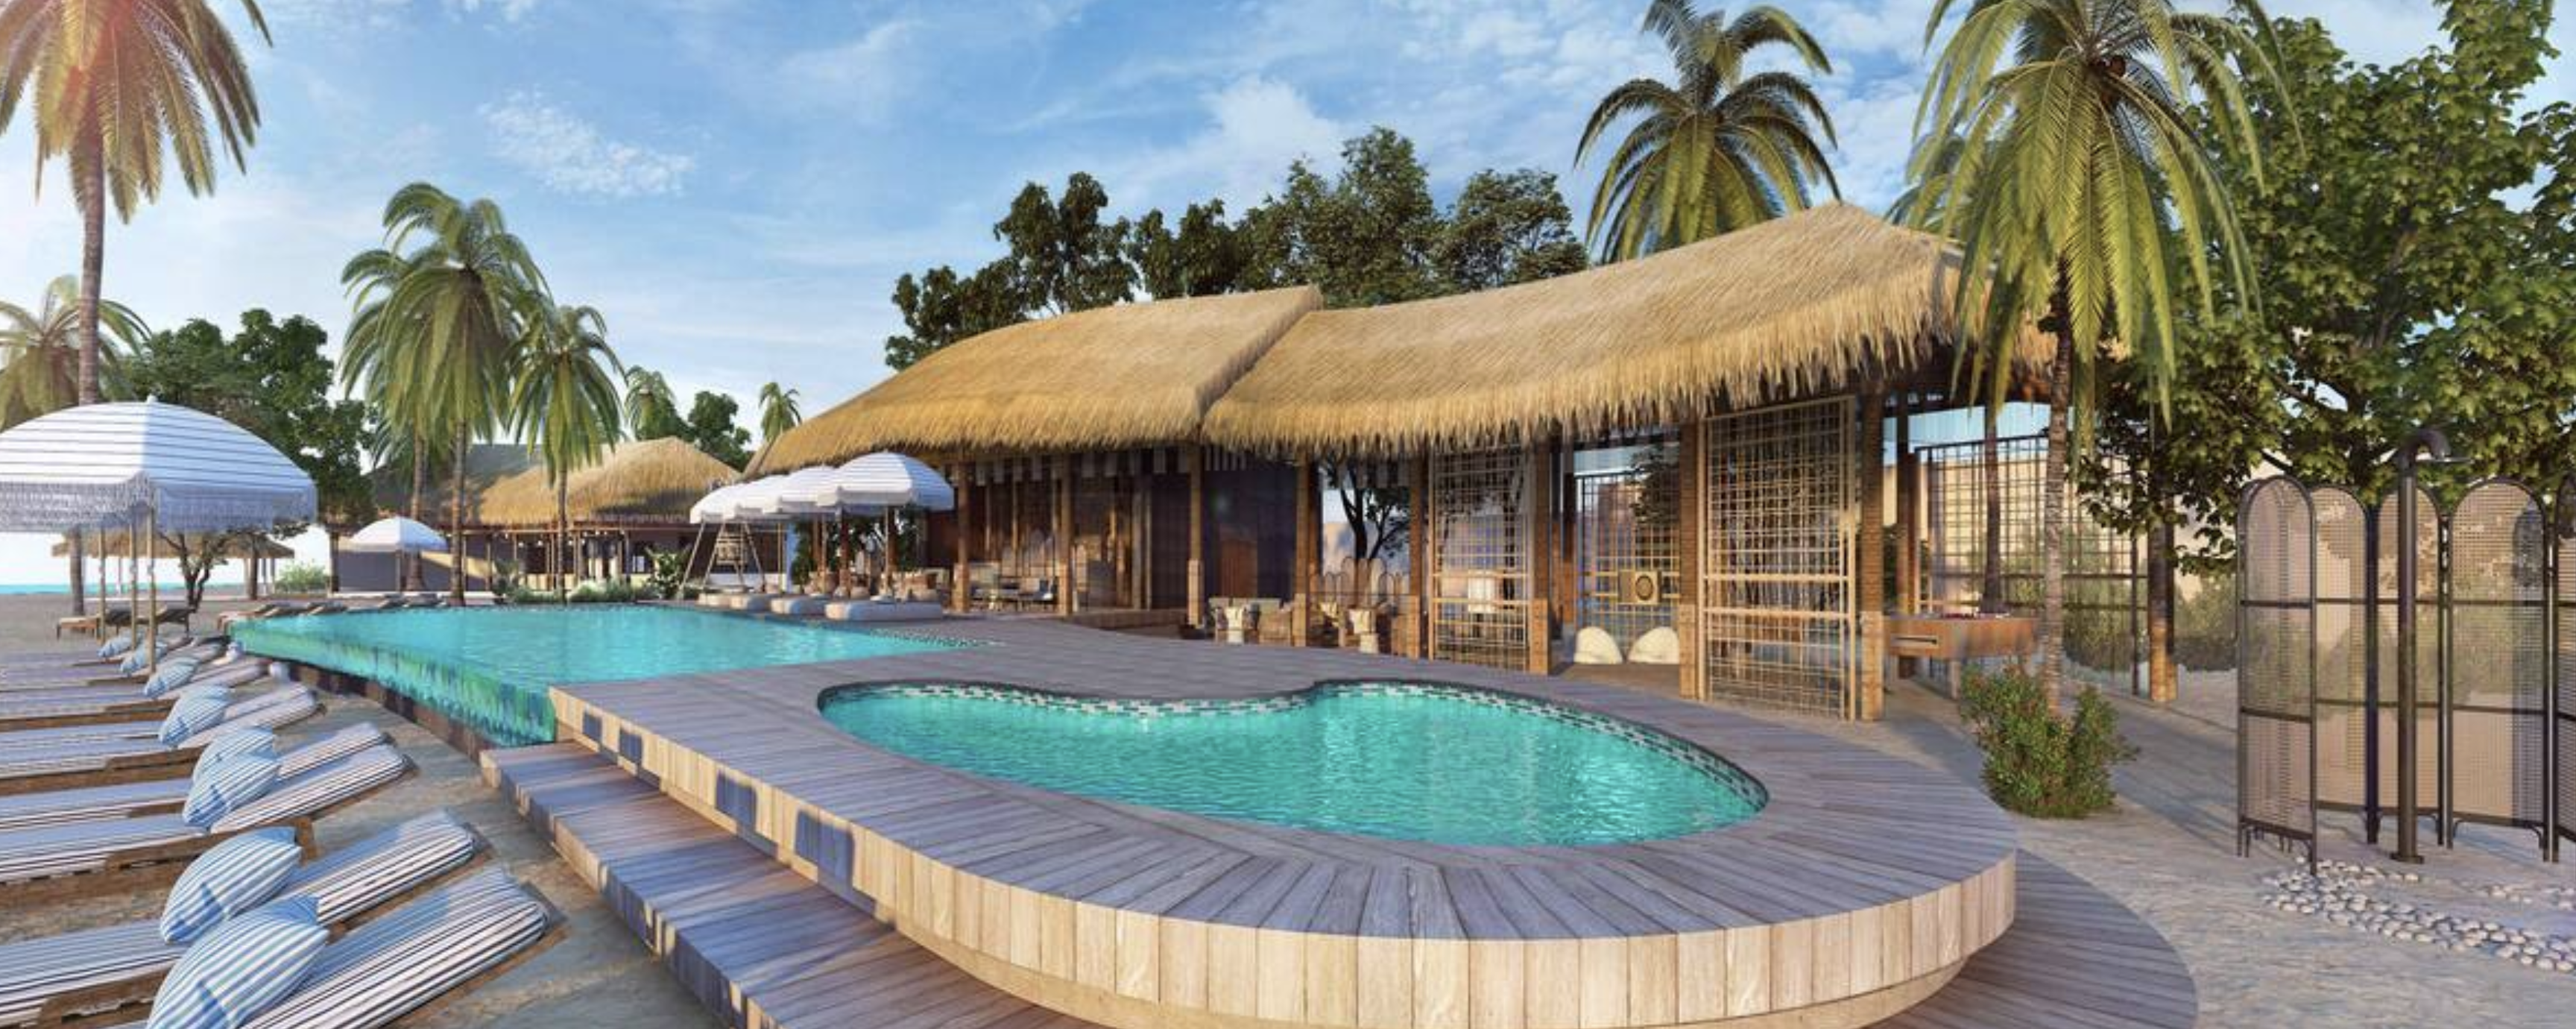 a swimming pool with a thatched roof